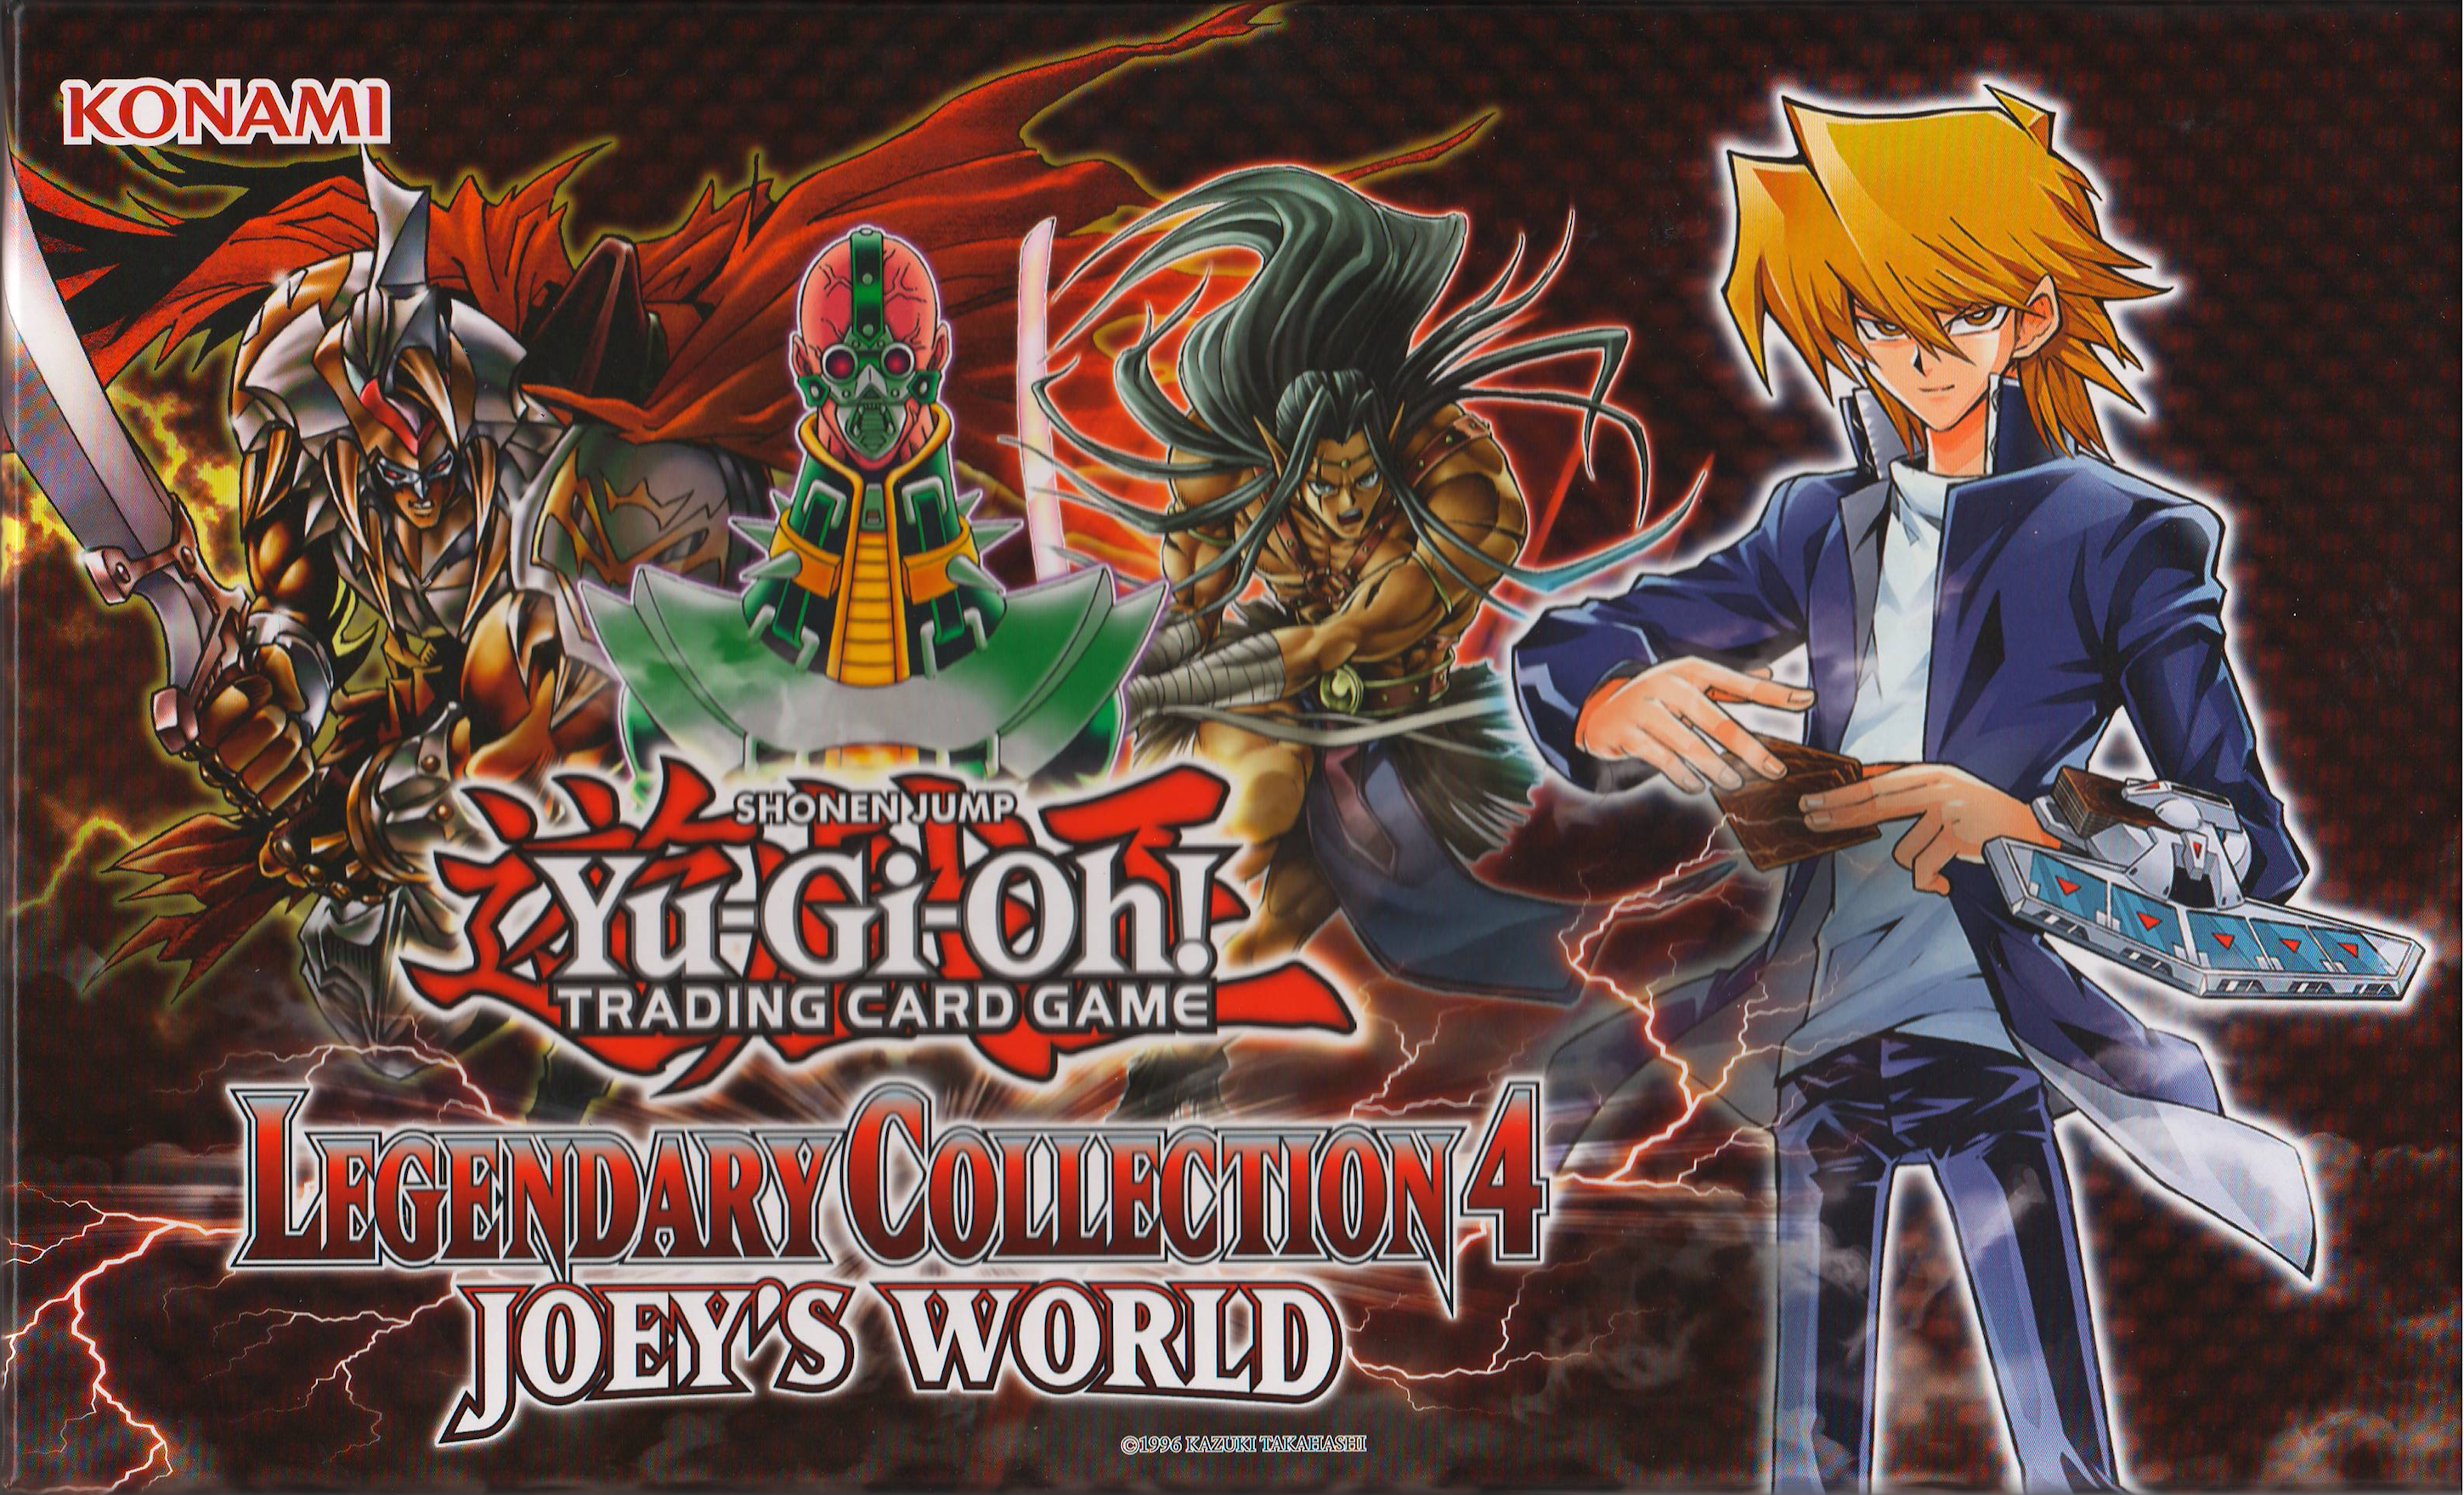 Legendary Collection 4: Joey's World